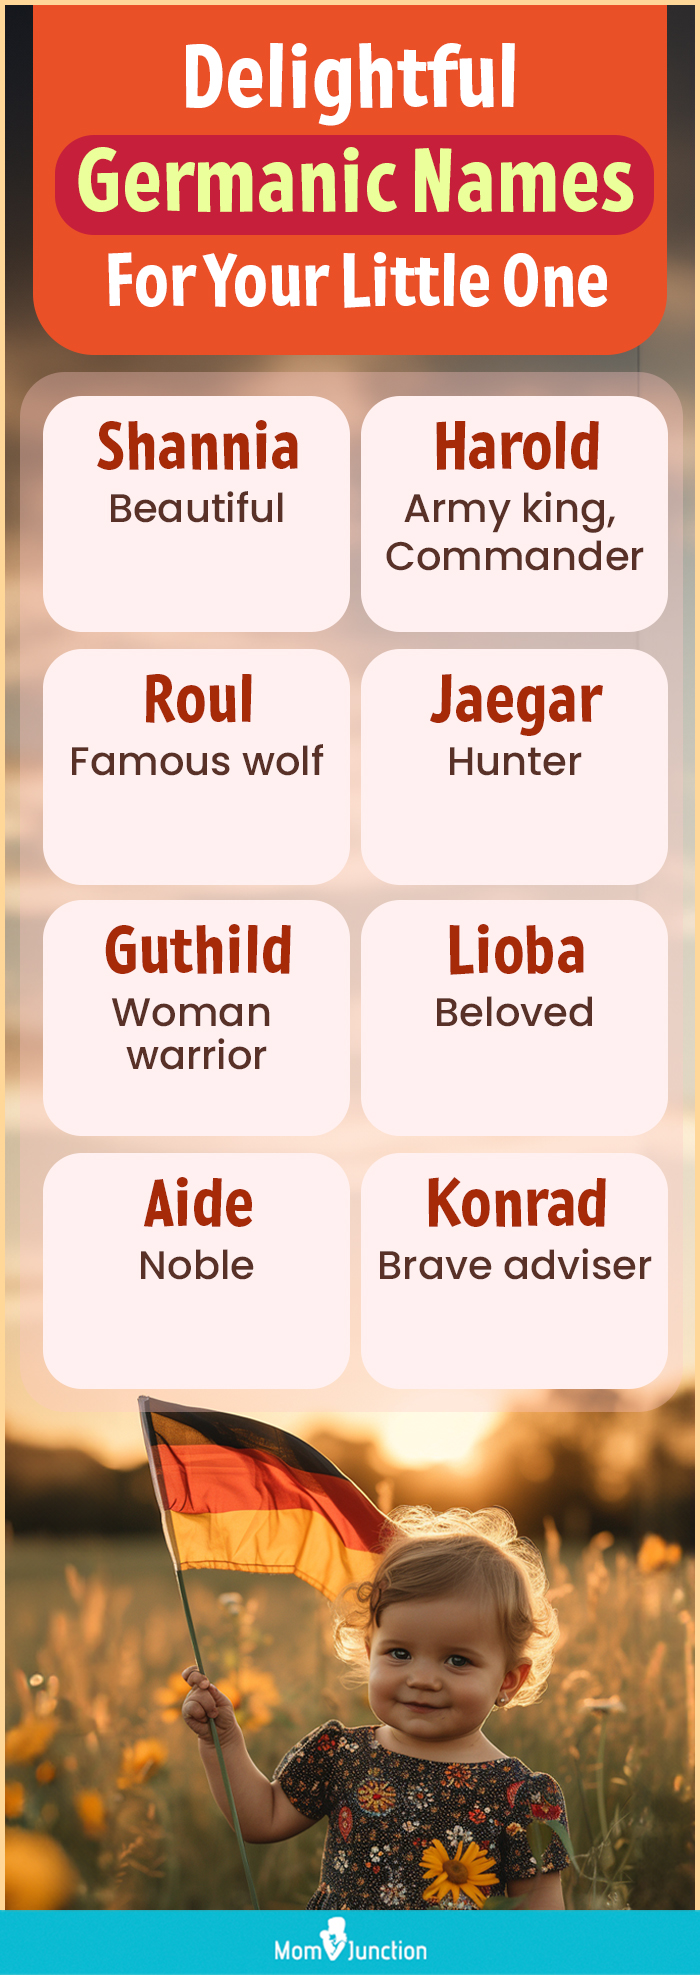 Delightful Germanic Names For Your Little One (infographic)